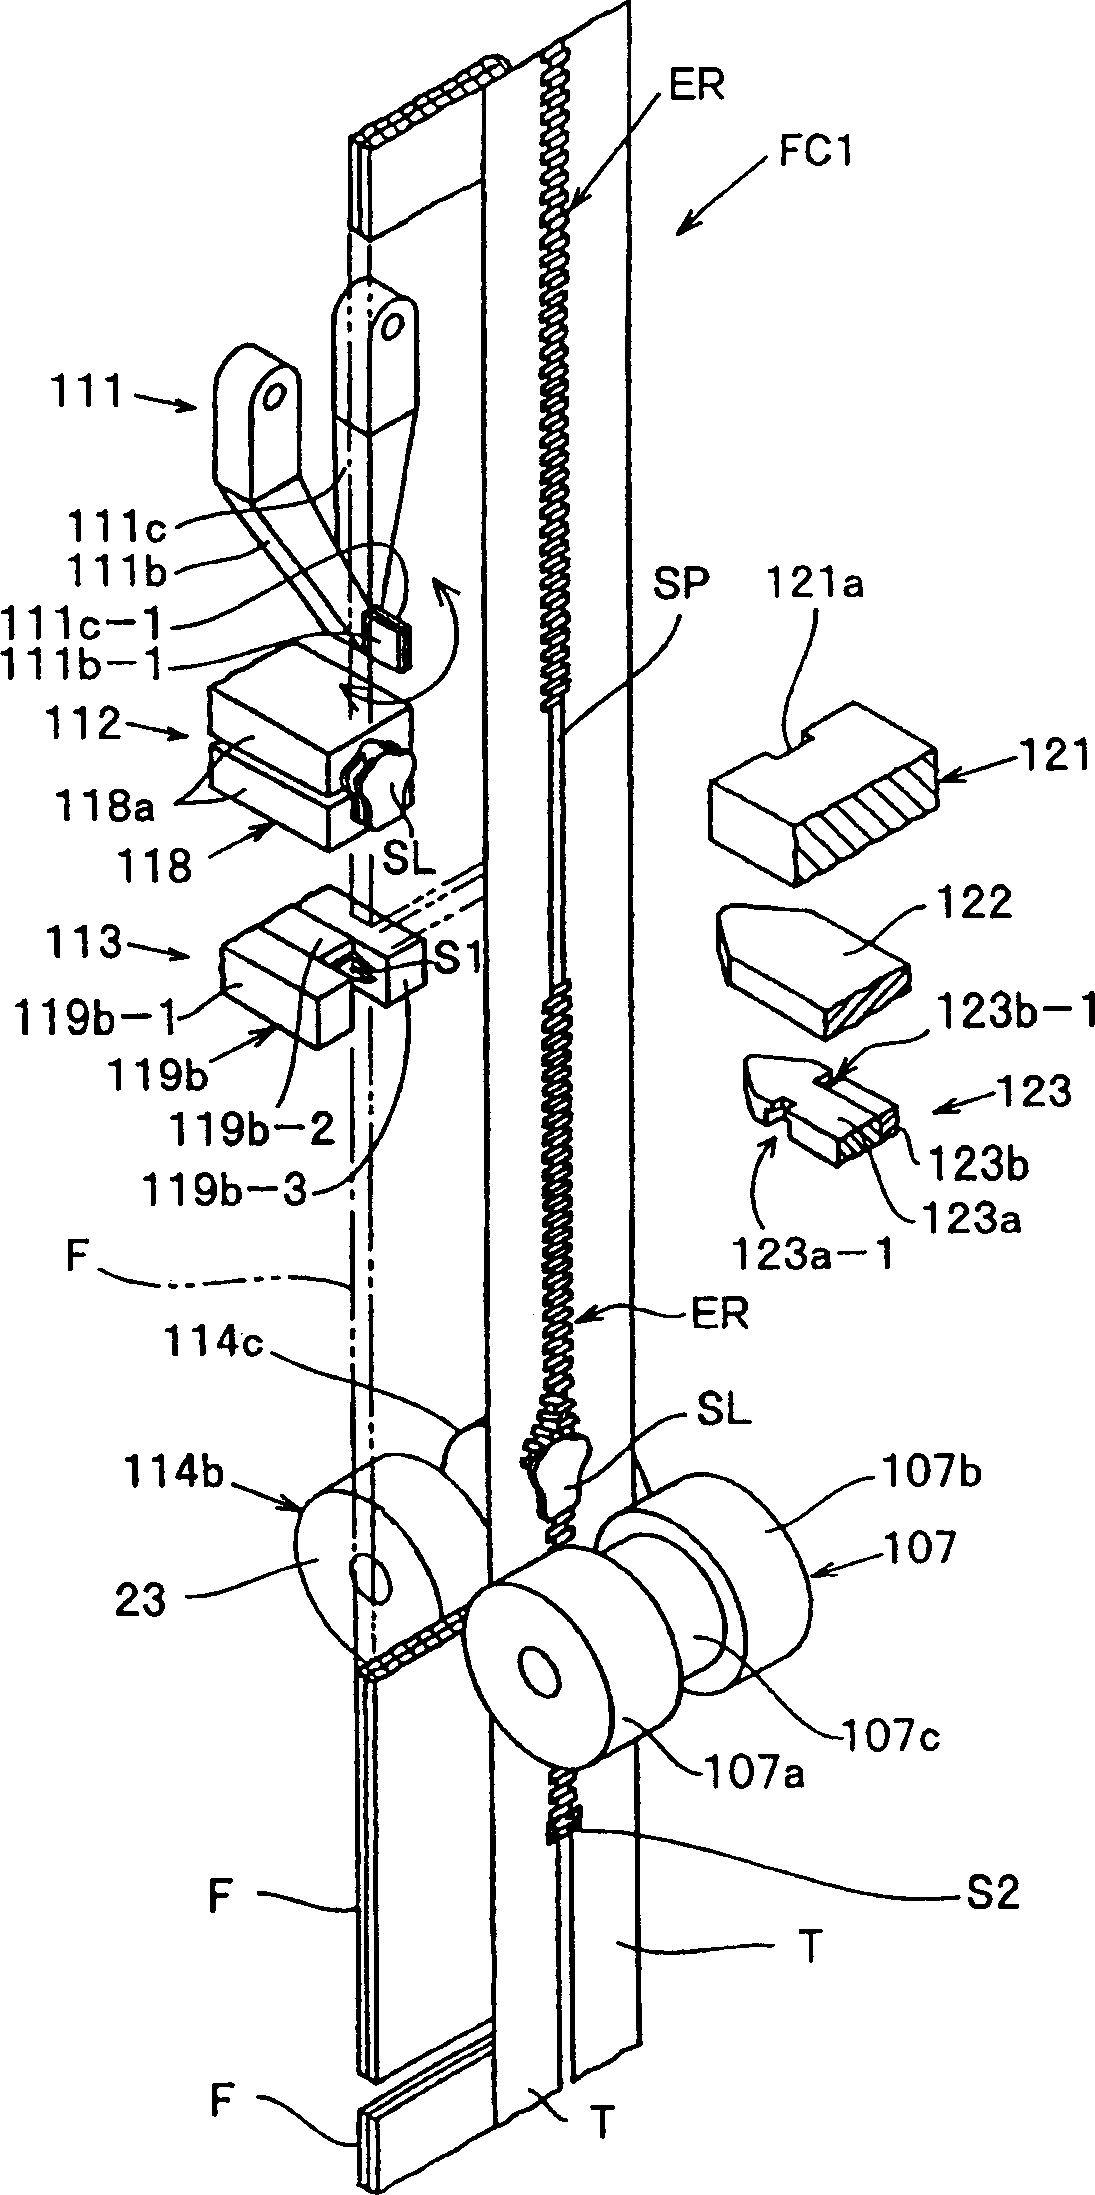 Continuous finishing apparatus for slide fastener